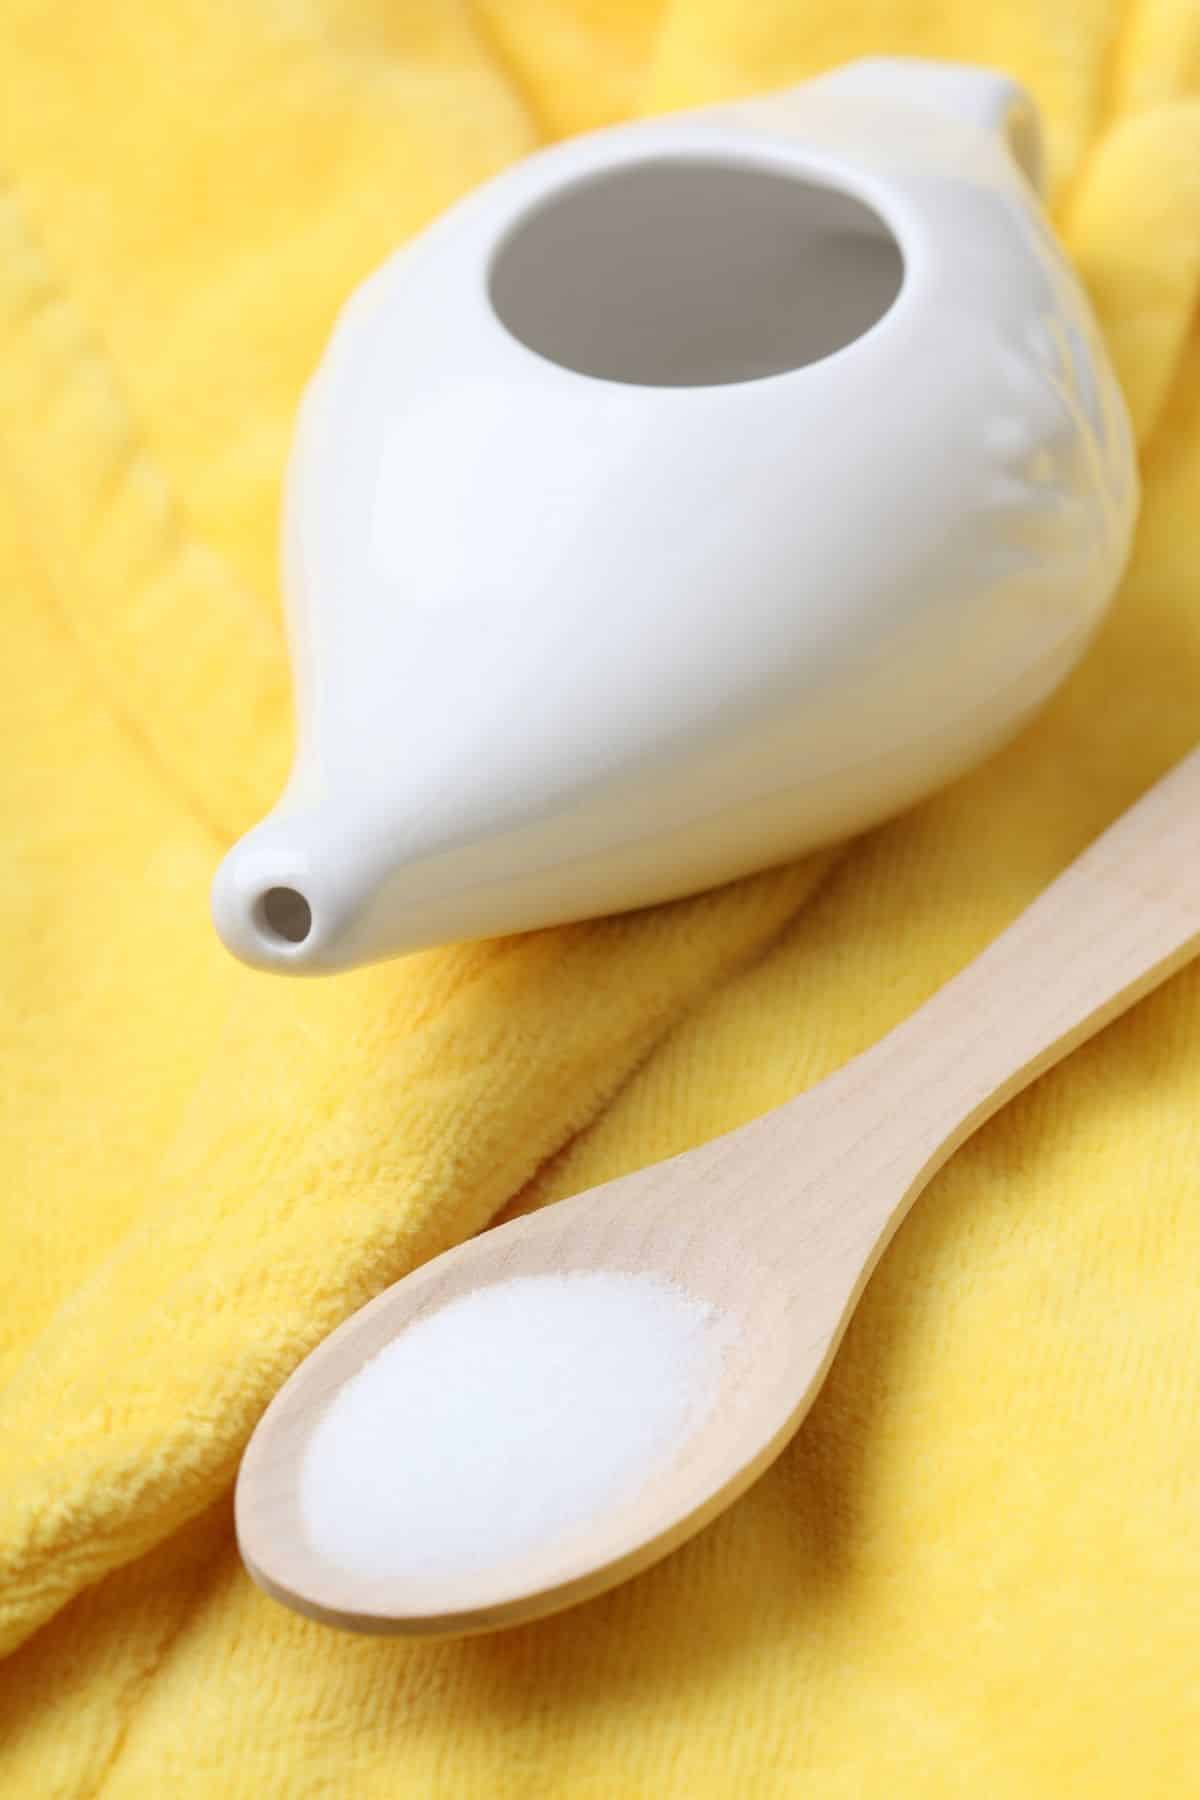 neti pot on a table with a spoonful of salt